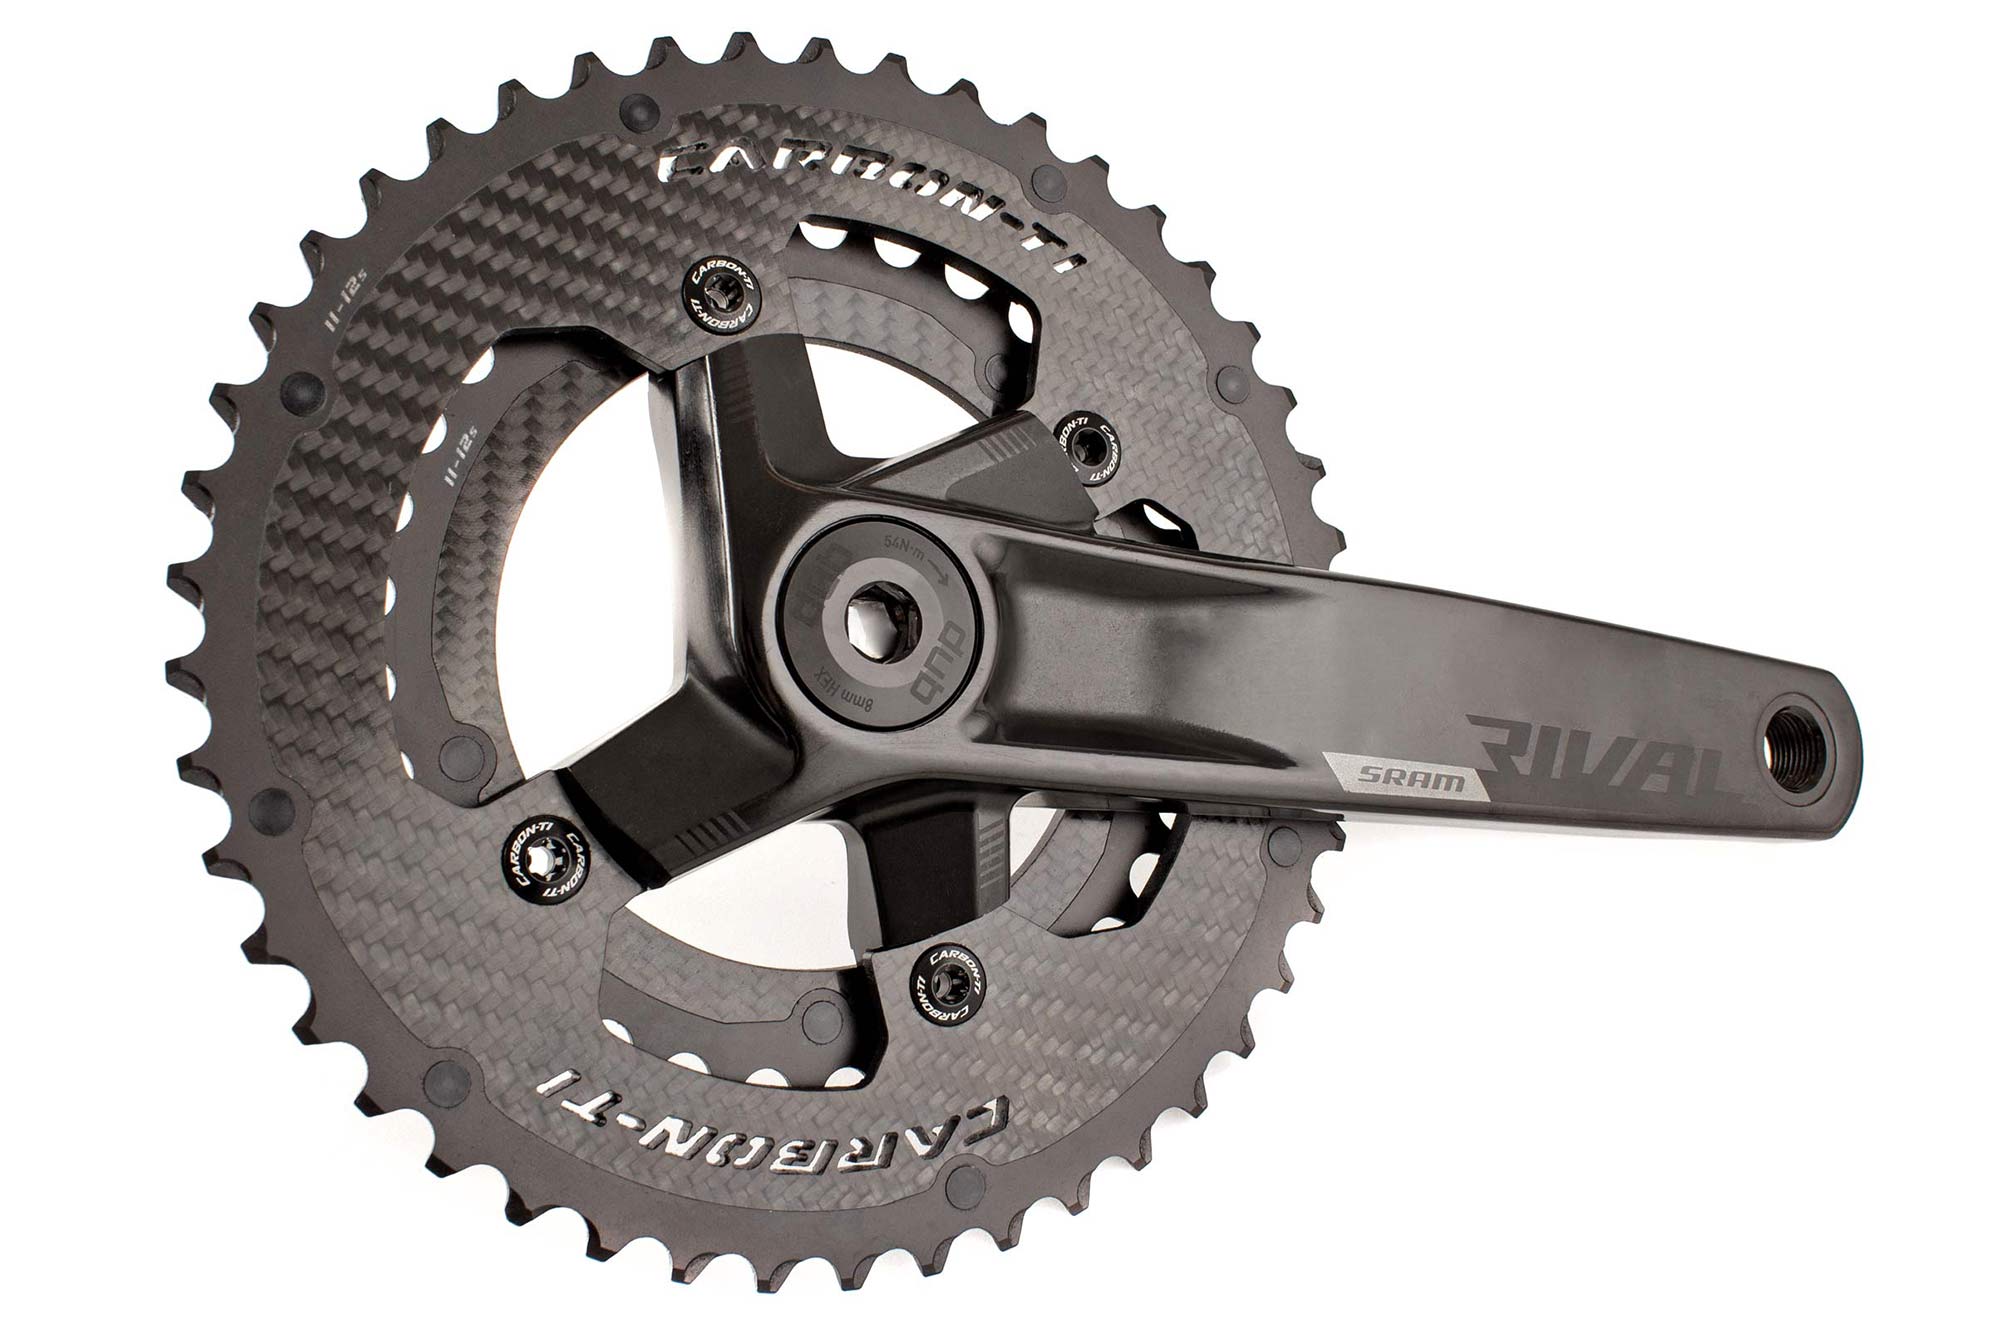 Carbon-Ti-X-Carboring-X-AXS-chainrings-for-SRAM-Rival-46-33-combo.jpg